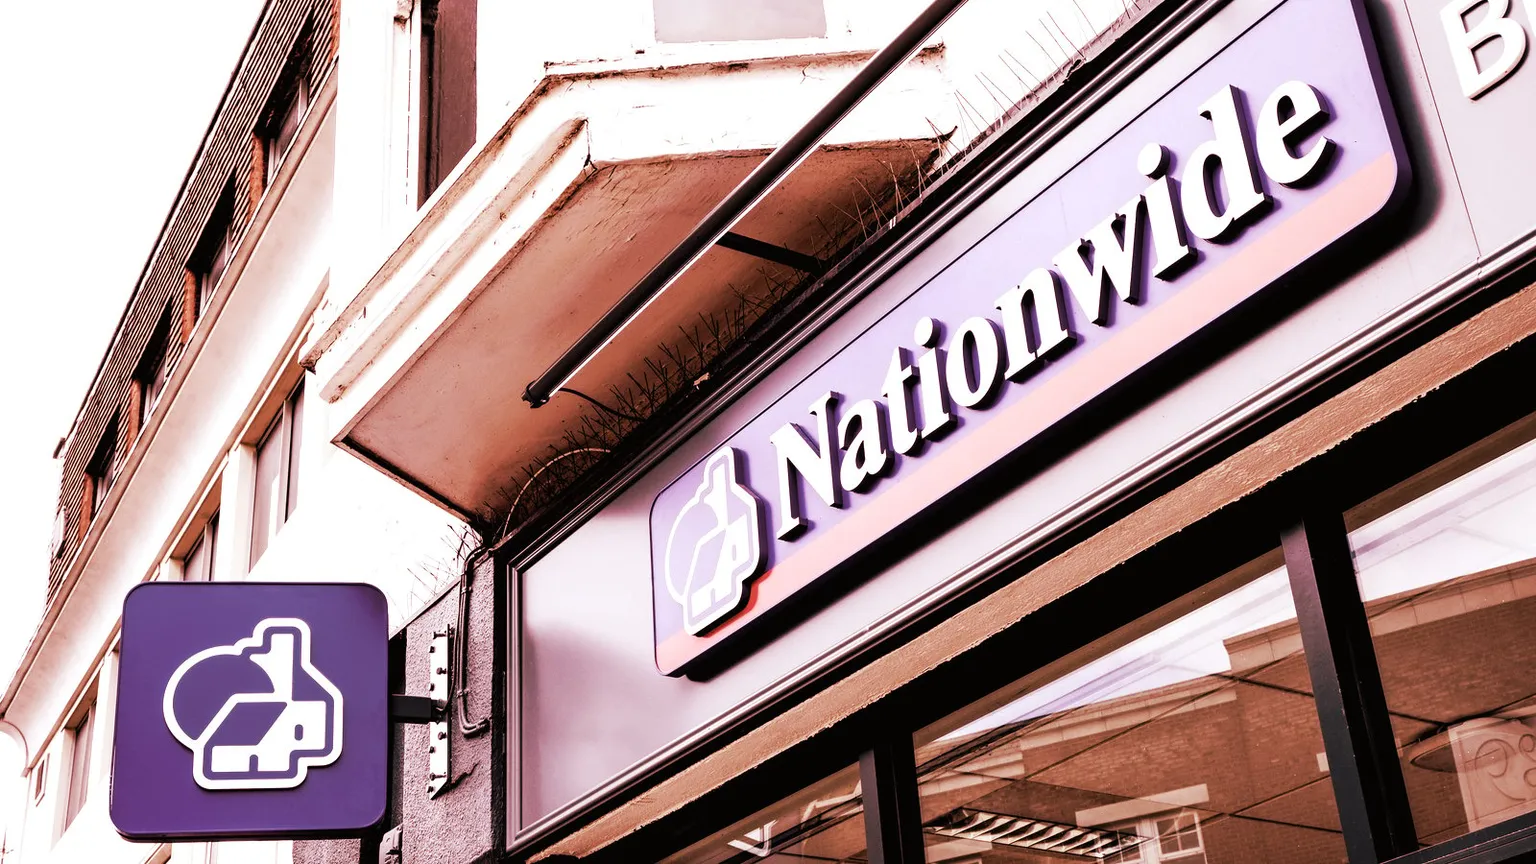 Nationwide Building Society is a British mutual financial institution. Image: Shutterstock